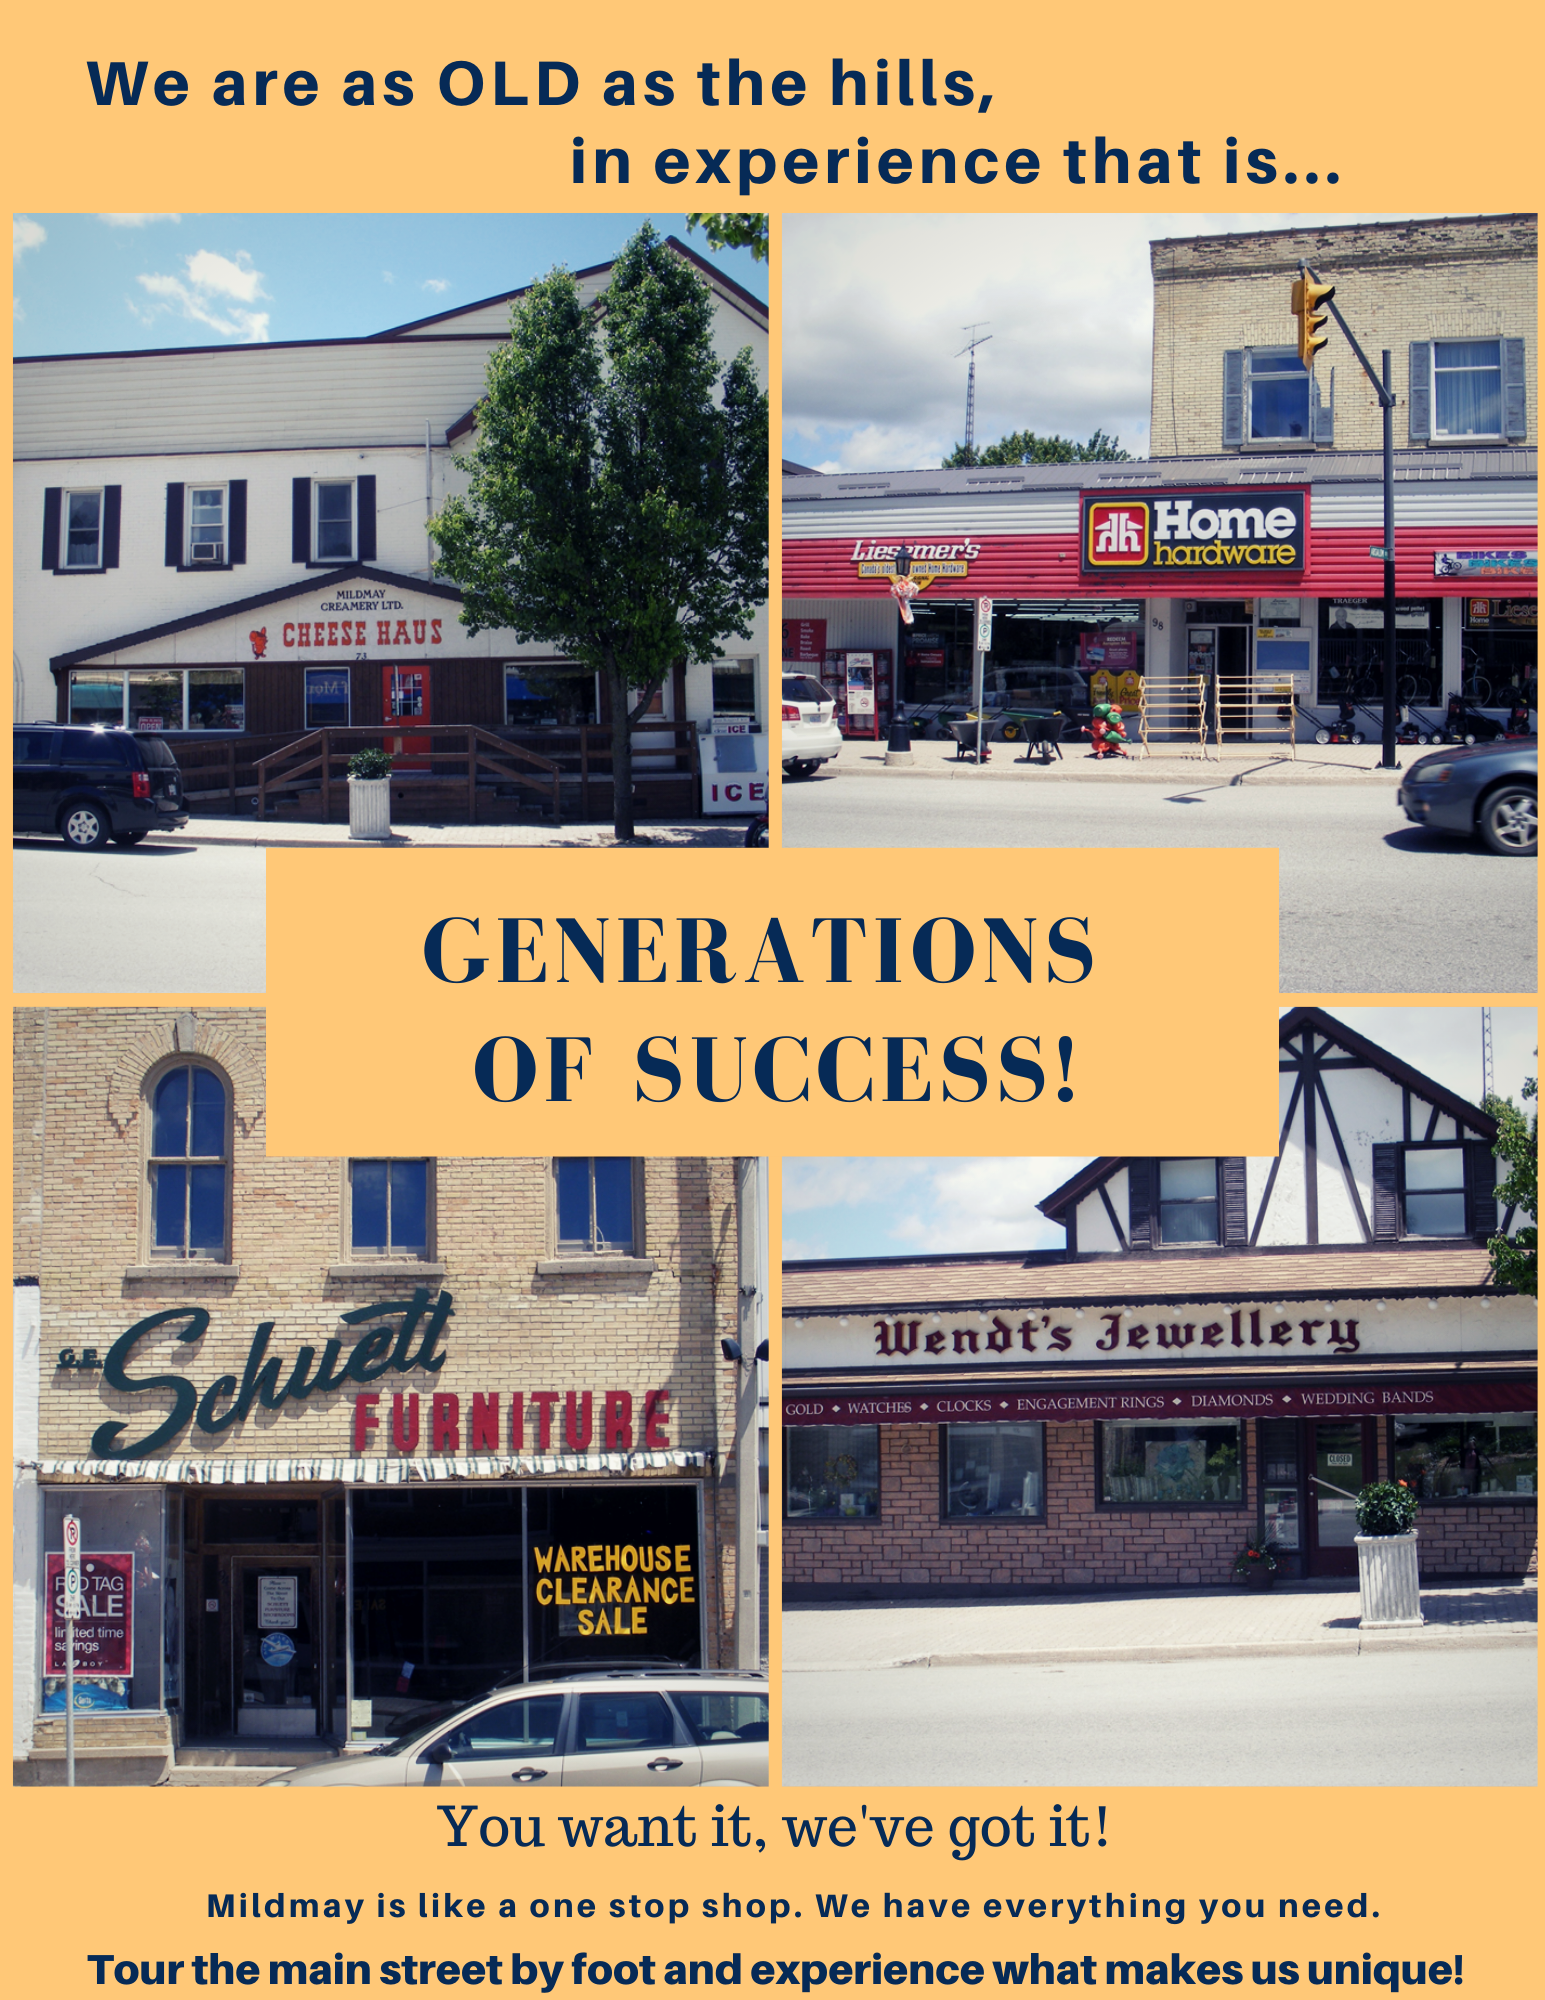 Poster of generational businesses in South bruce